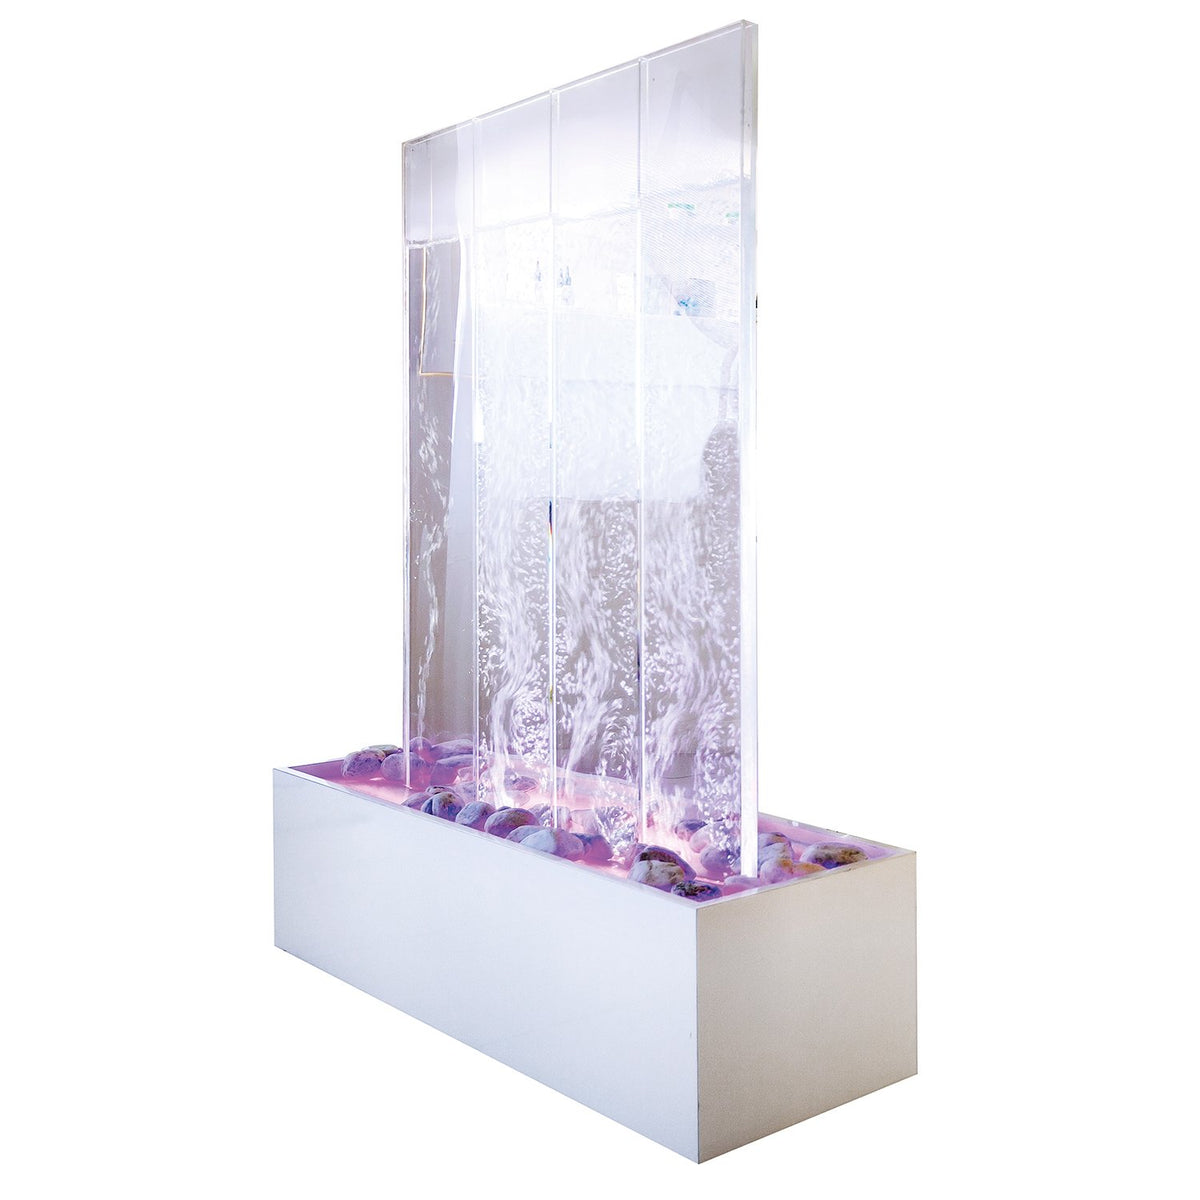 MALETTI Spring, Water and Light Effects Display